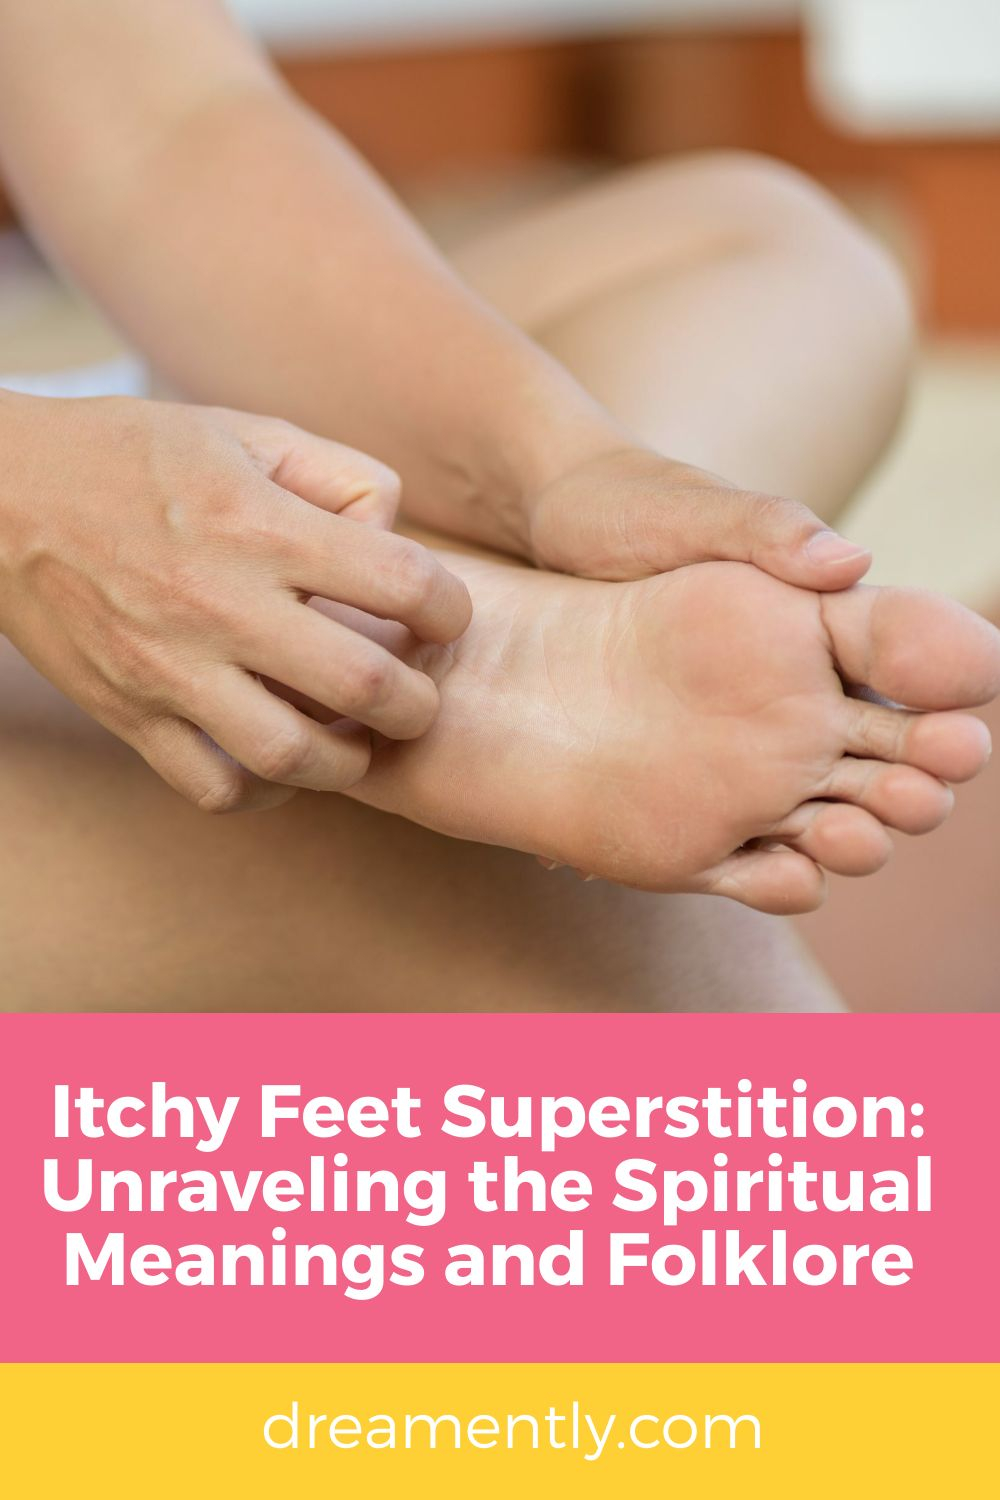 Itchy Feet Superstition Unraveling the Spiritual Meanings and Folklore